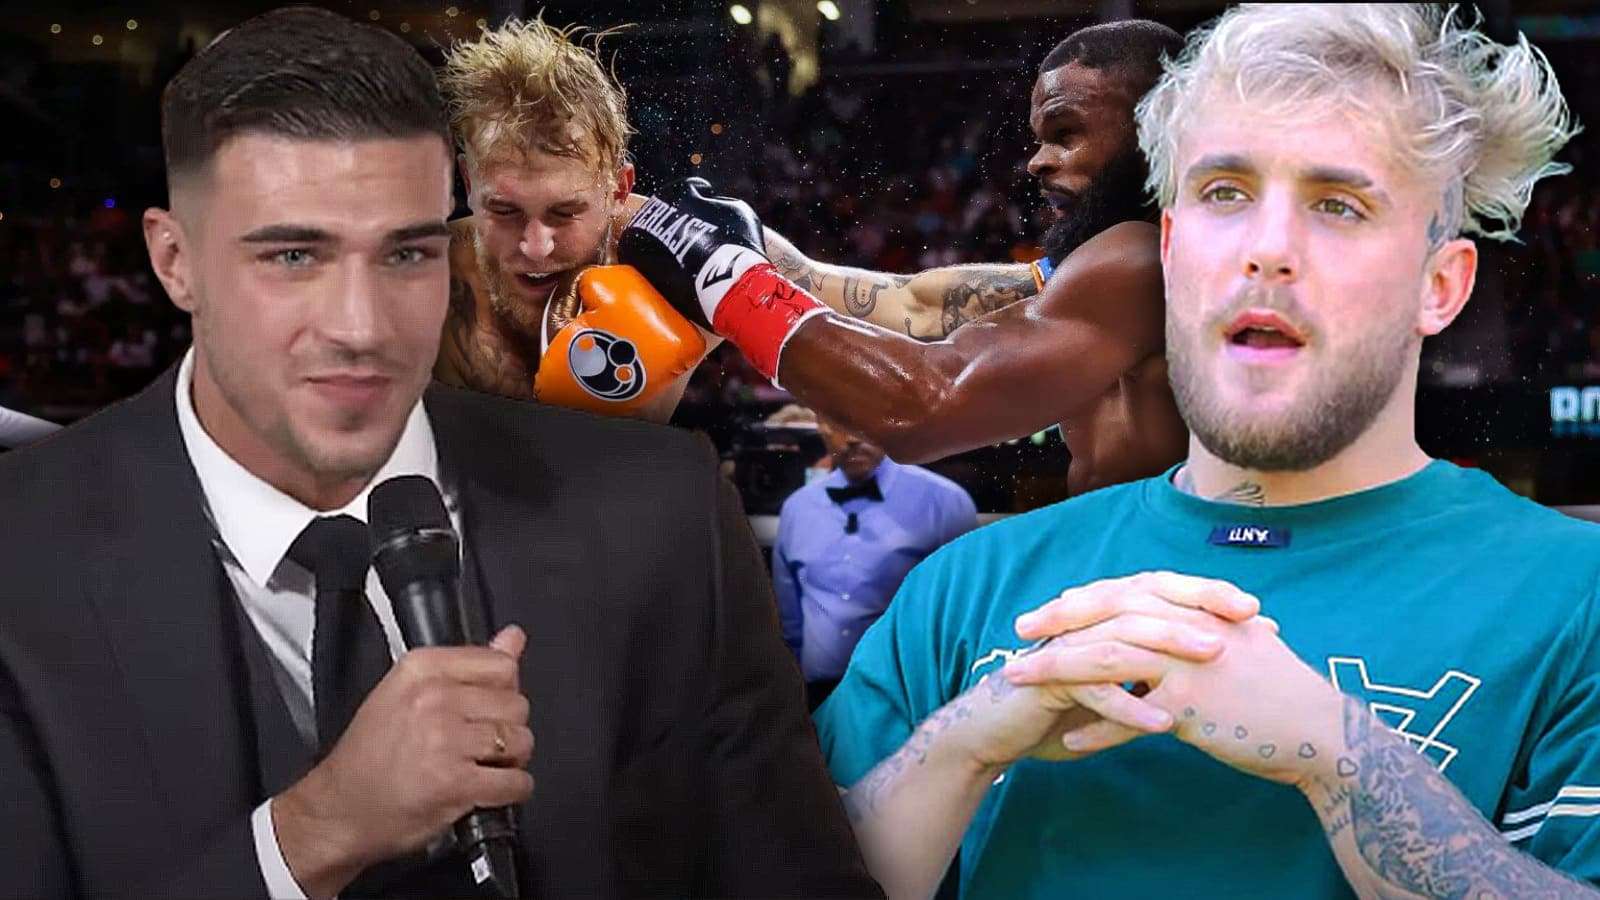 Tommy Fury slams Jake Paul accuses of rigging past boxing matches